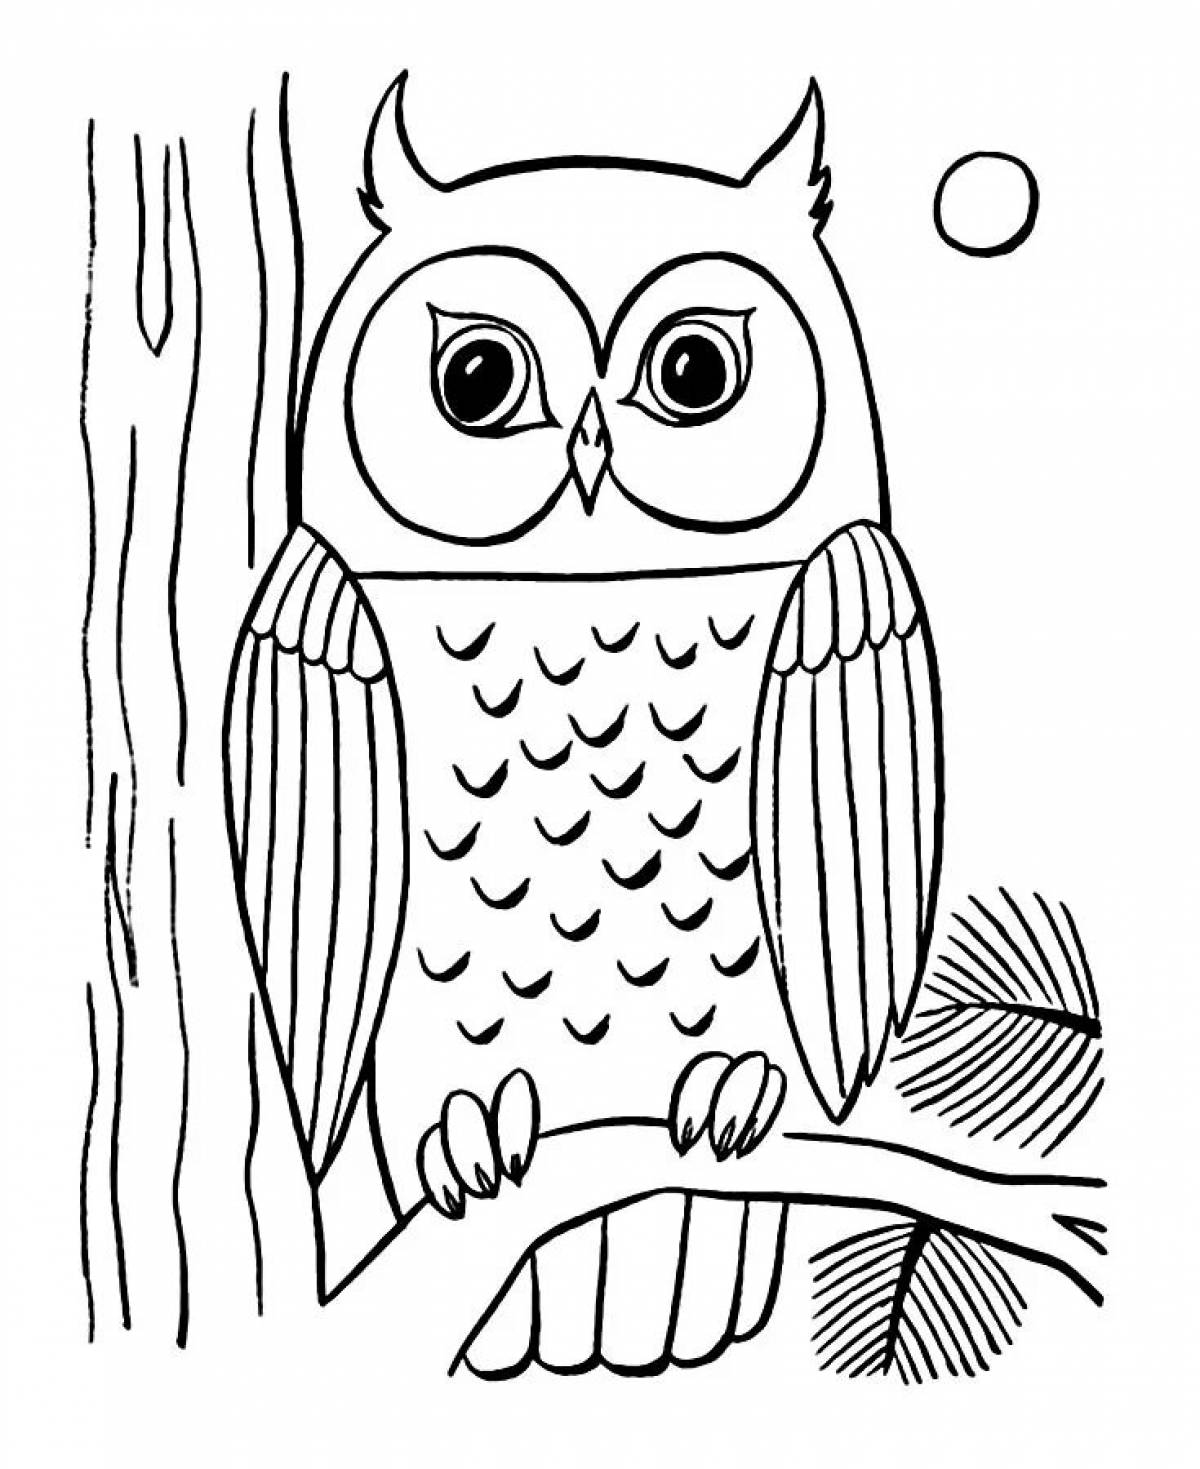 Owl picture for kids #5